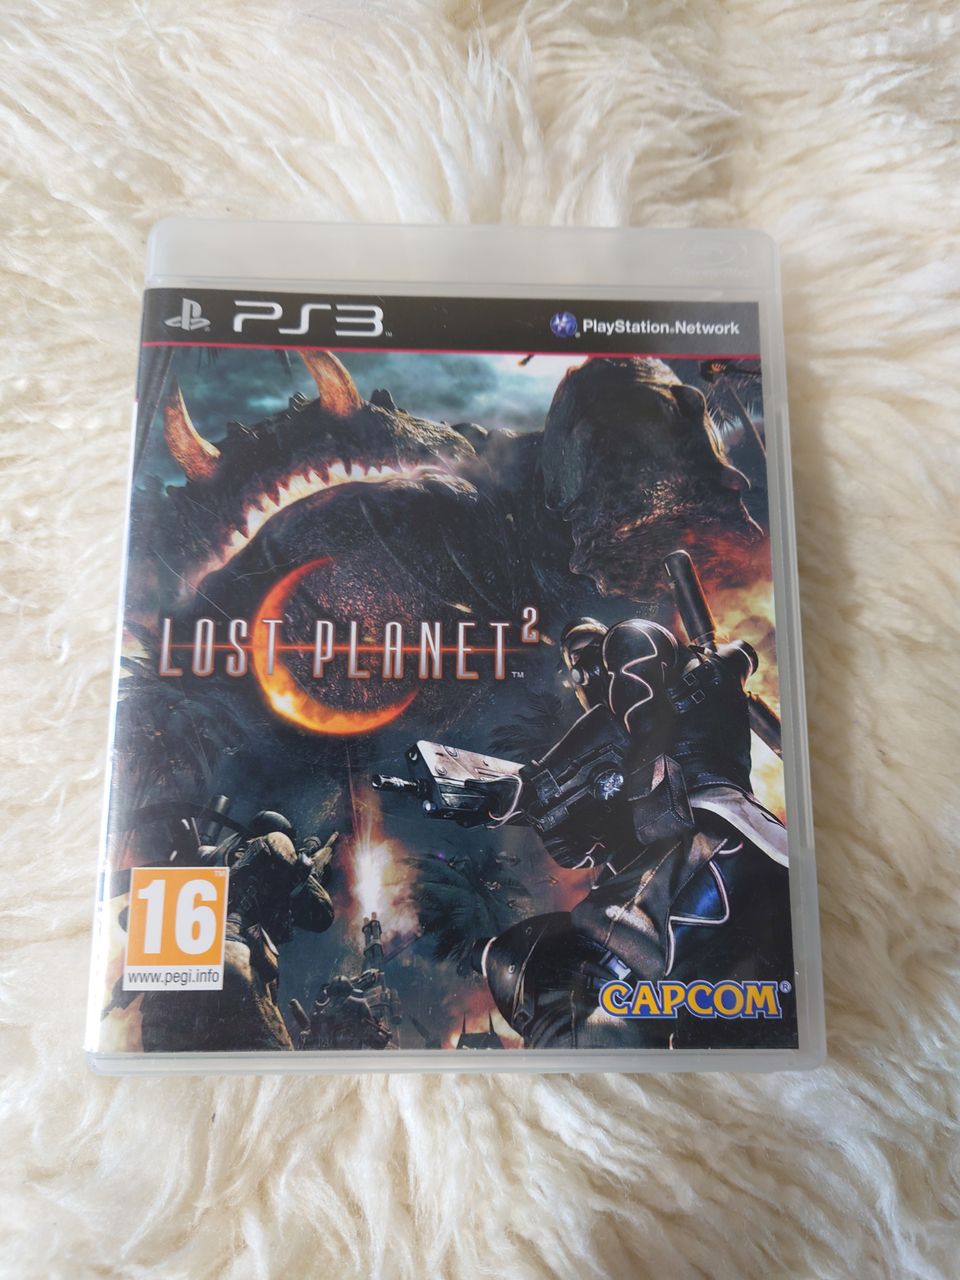 PS3 Lost planet 2